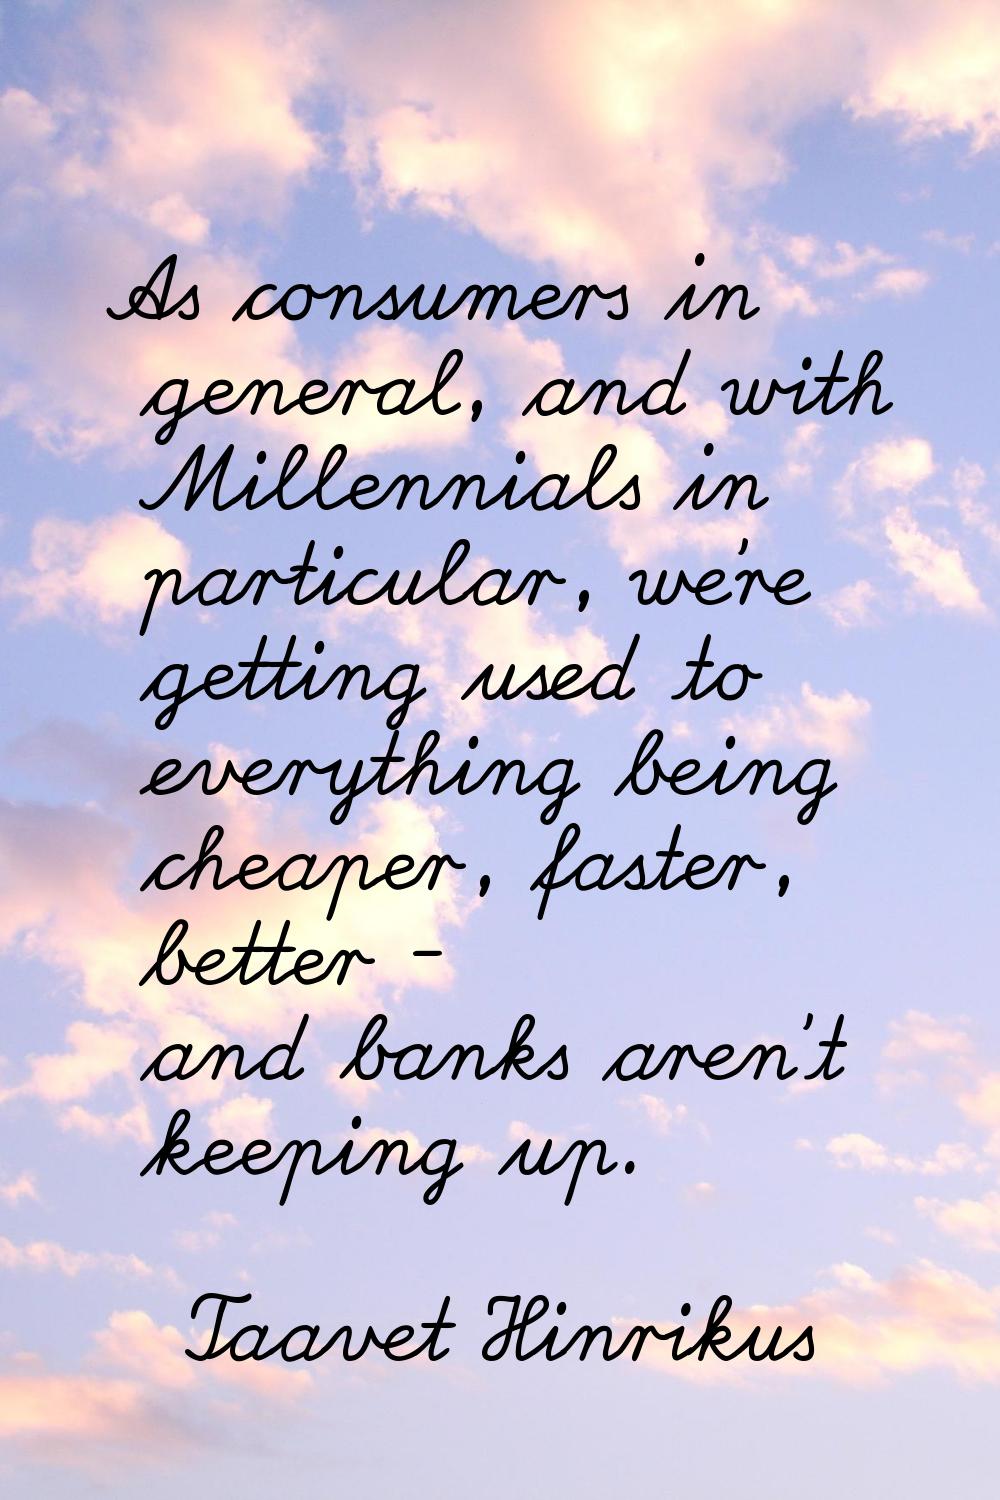 As consumers in general, and with Millennials in particular, we're getting used to everything being